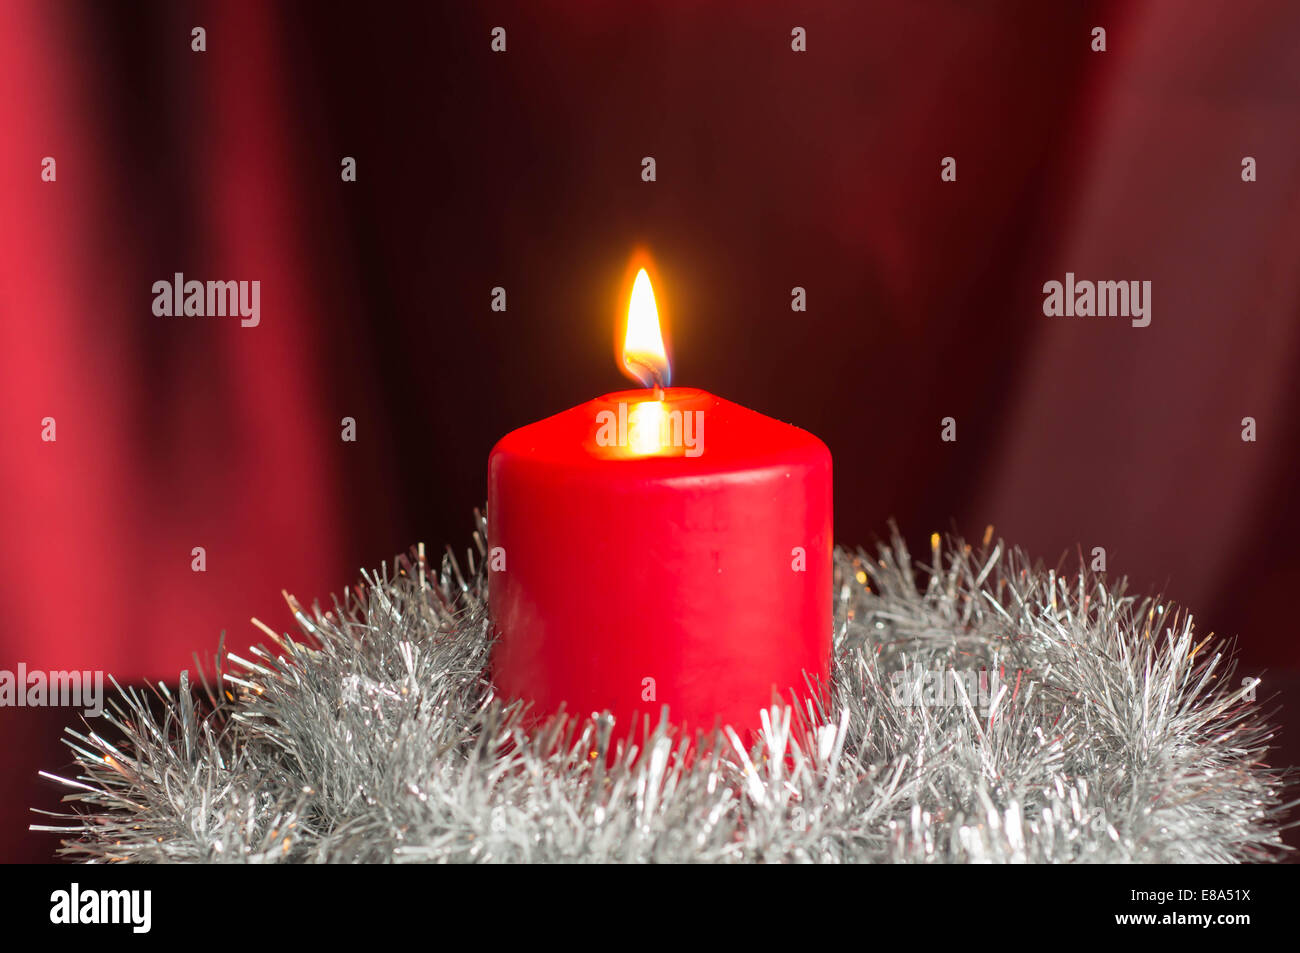 Red candle with a silvery Christmas decor Stock Photo